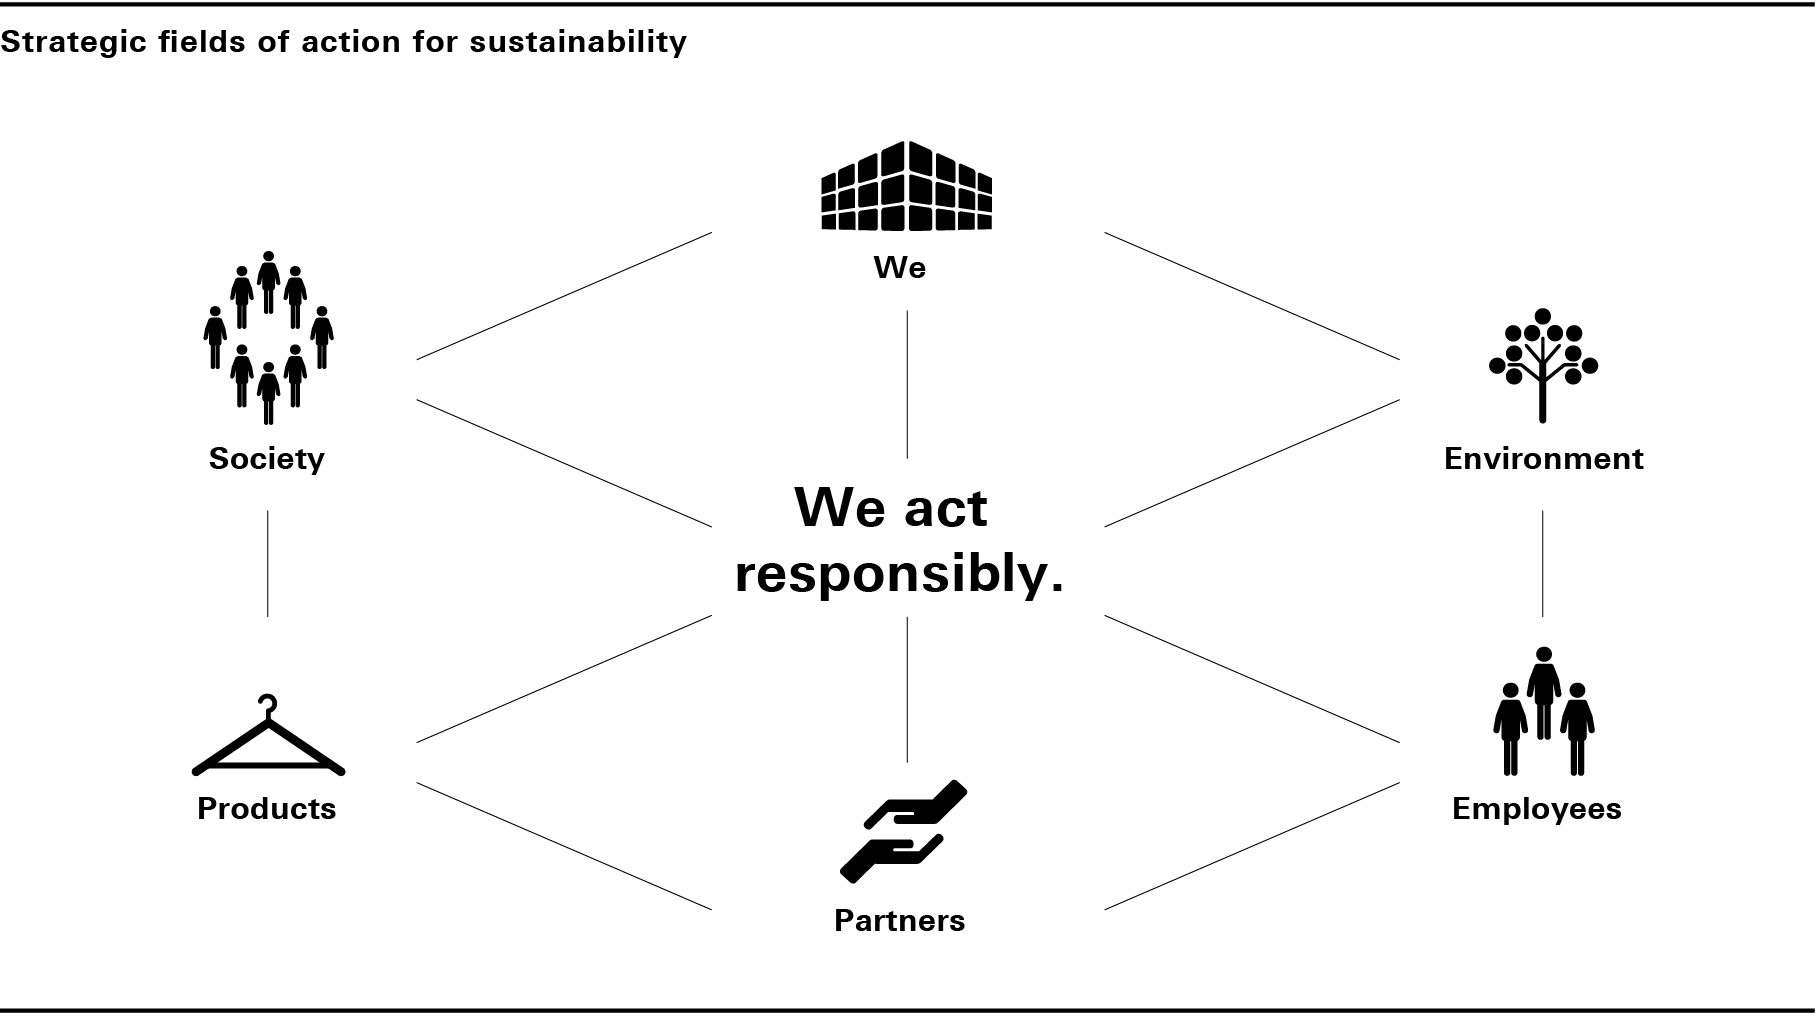 Strategic fields of action for sustainability (graphic)